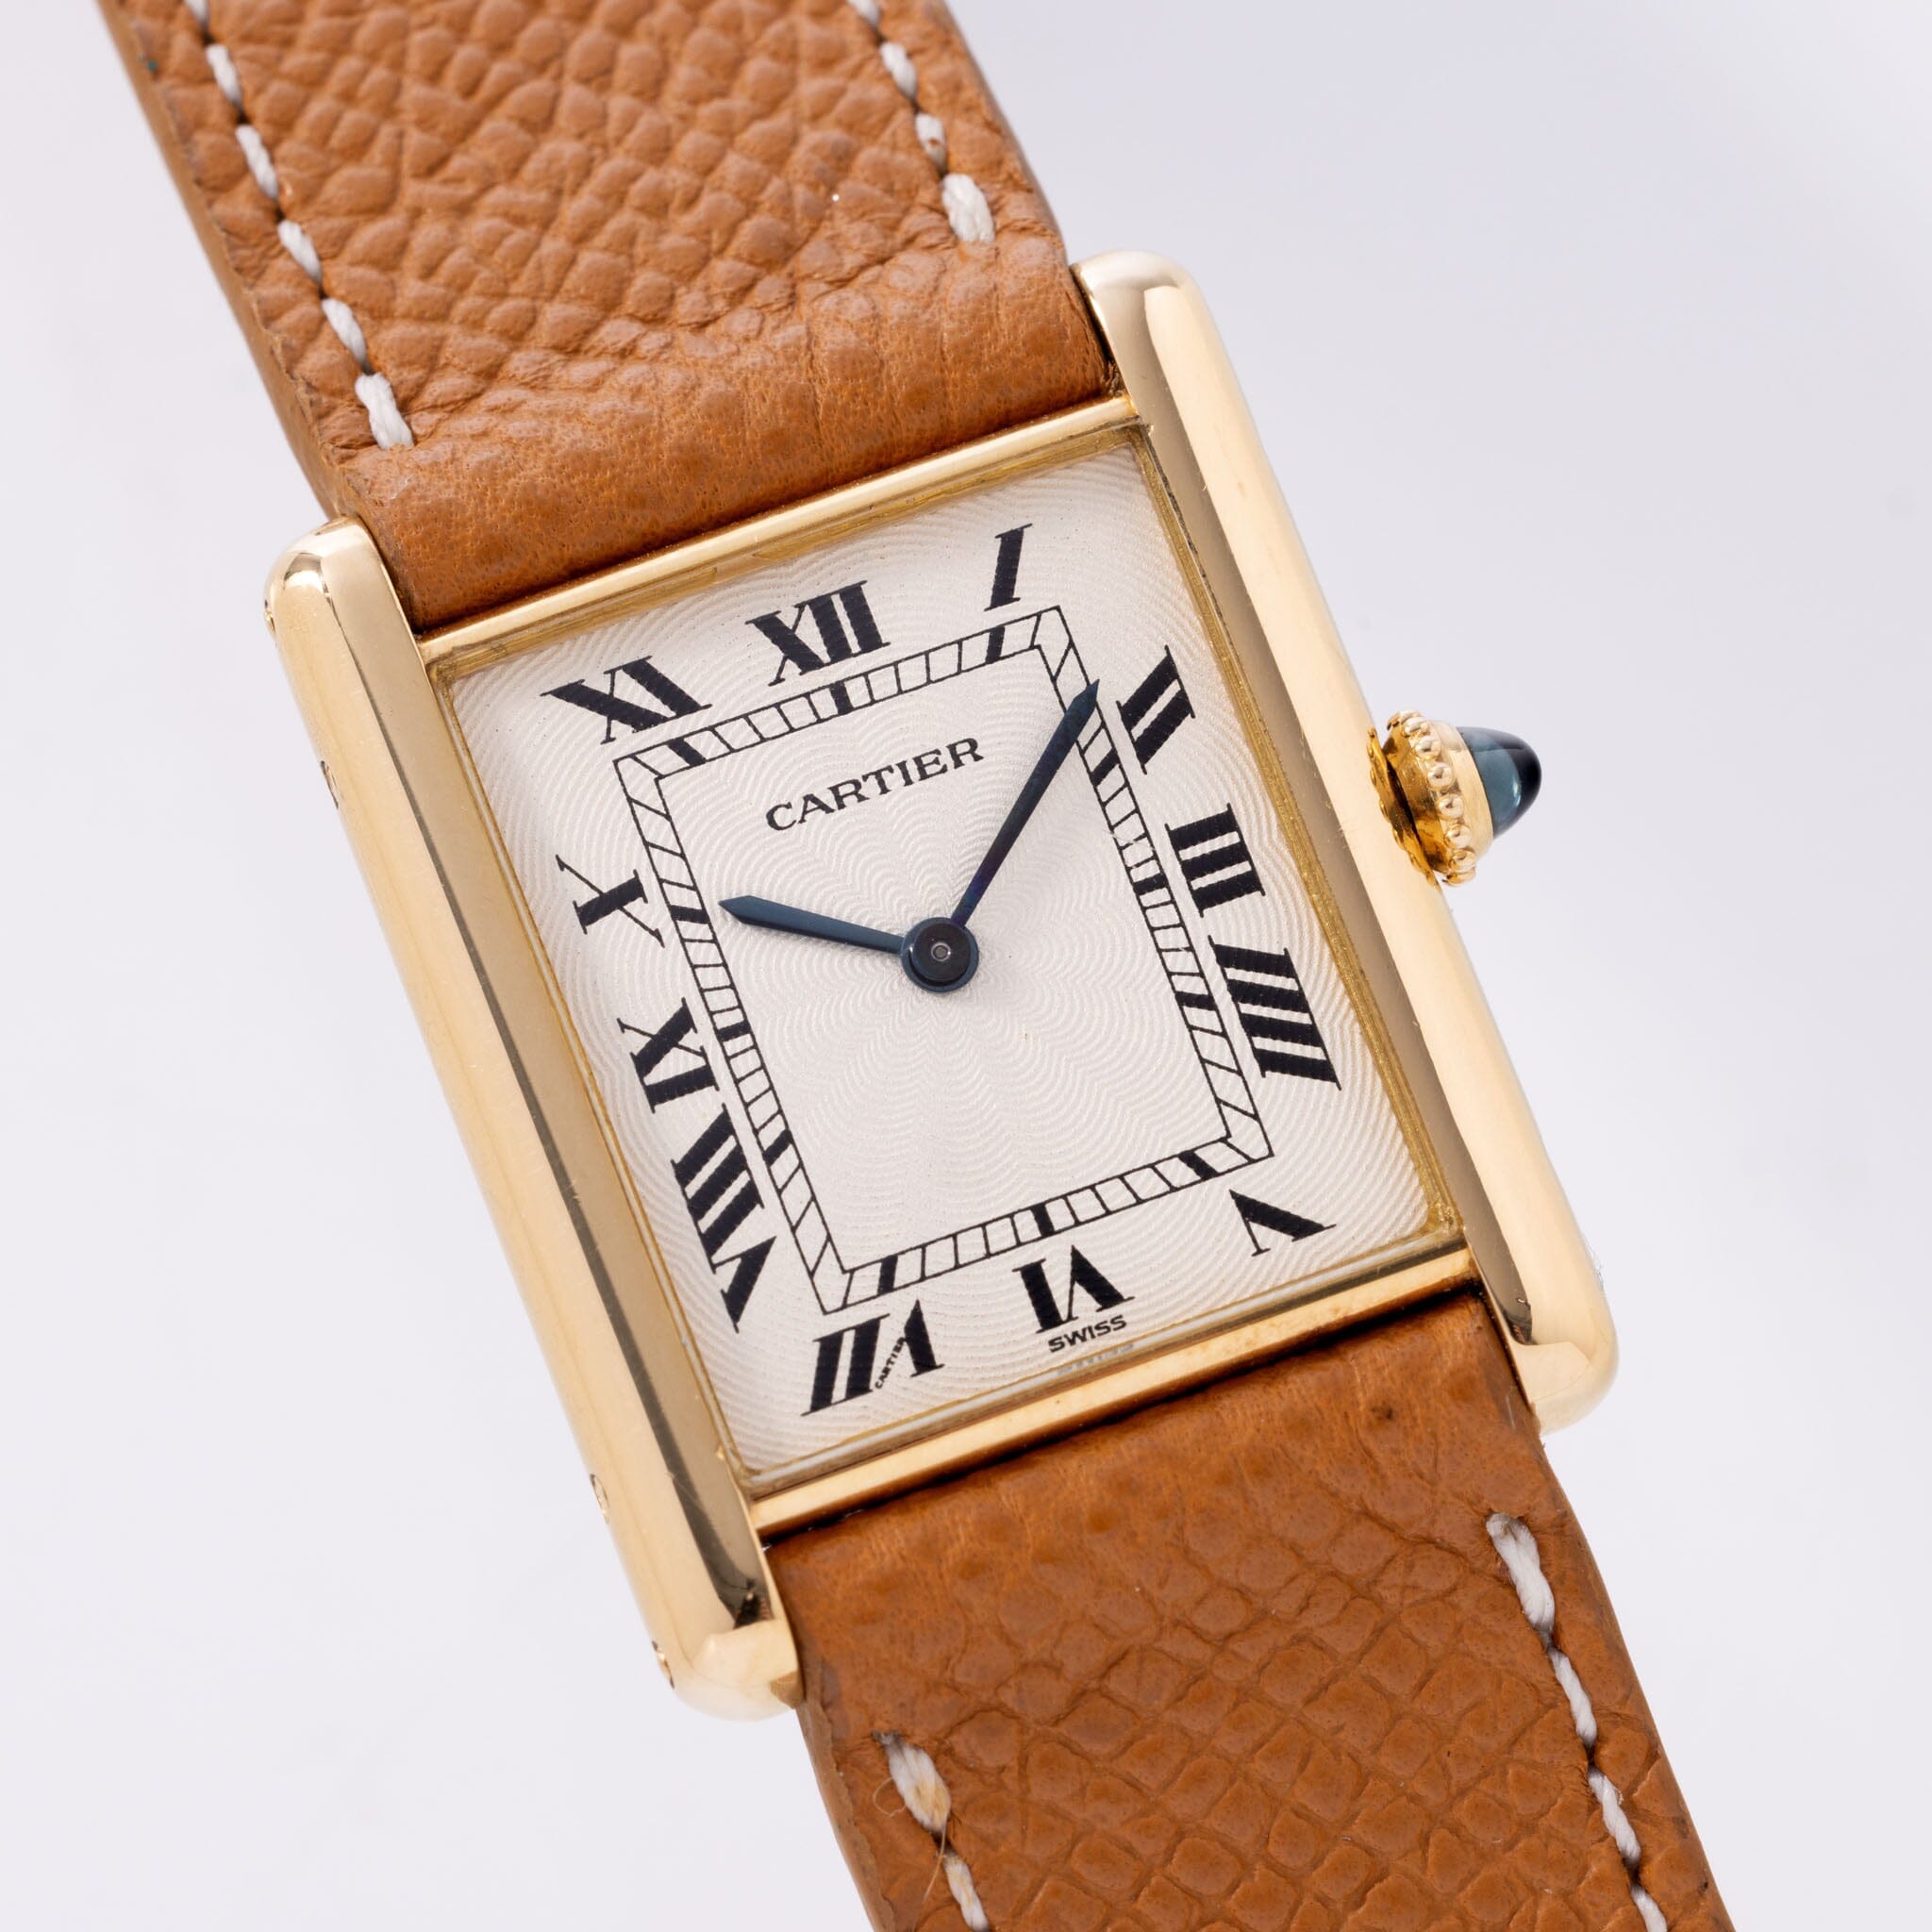 Tank Louis Cartier watch Large model, hand-wound mechanical movement,  yellow gold, leather